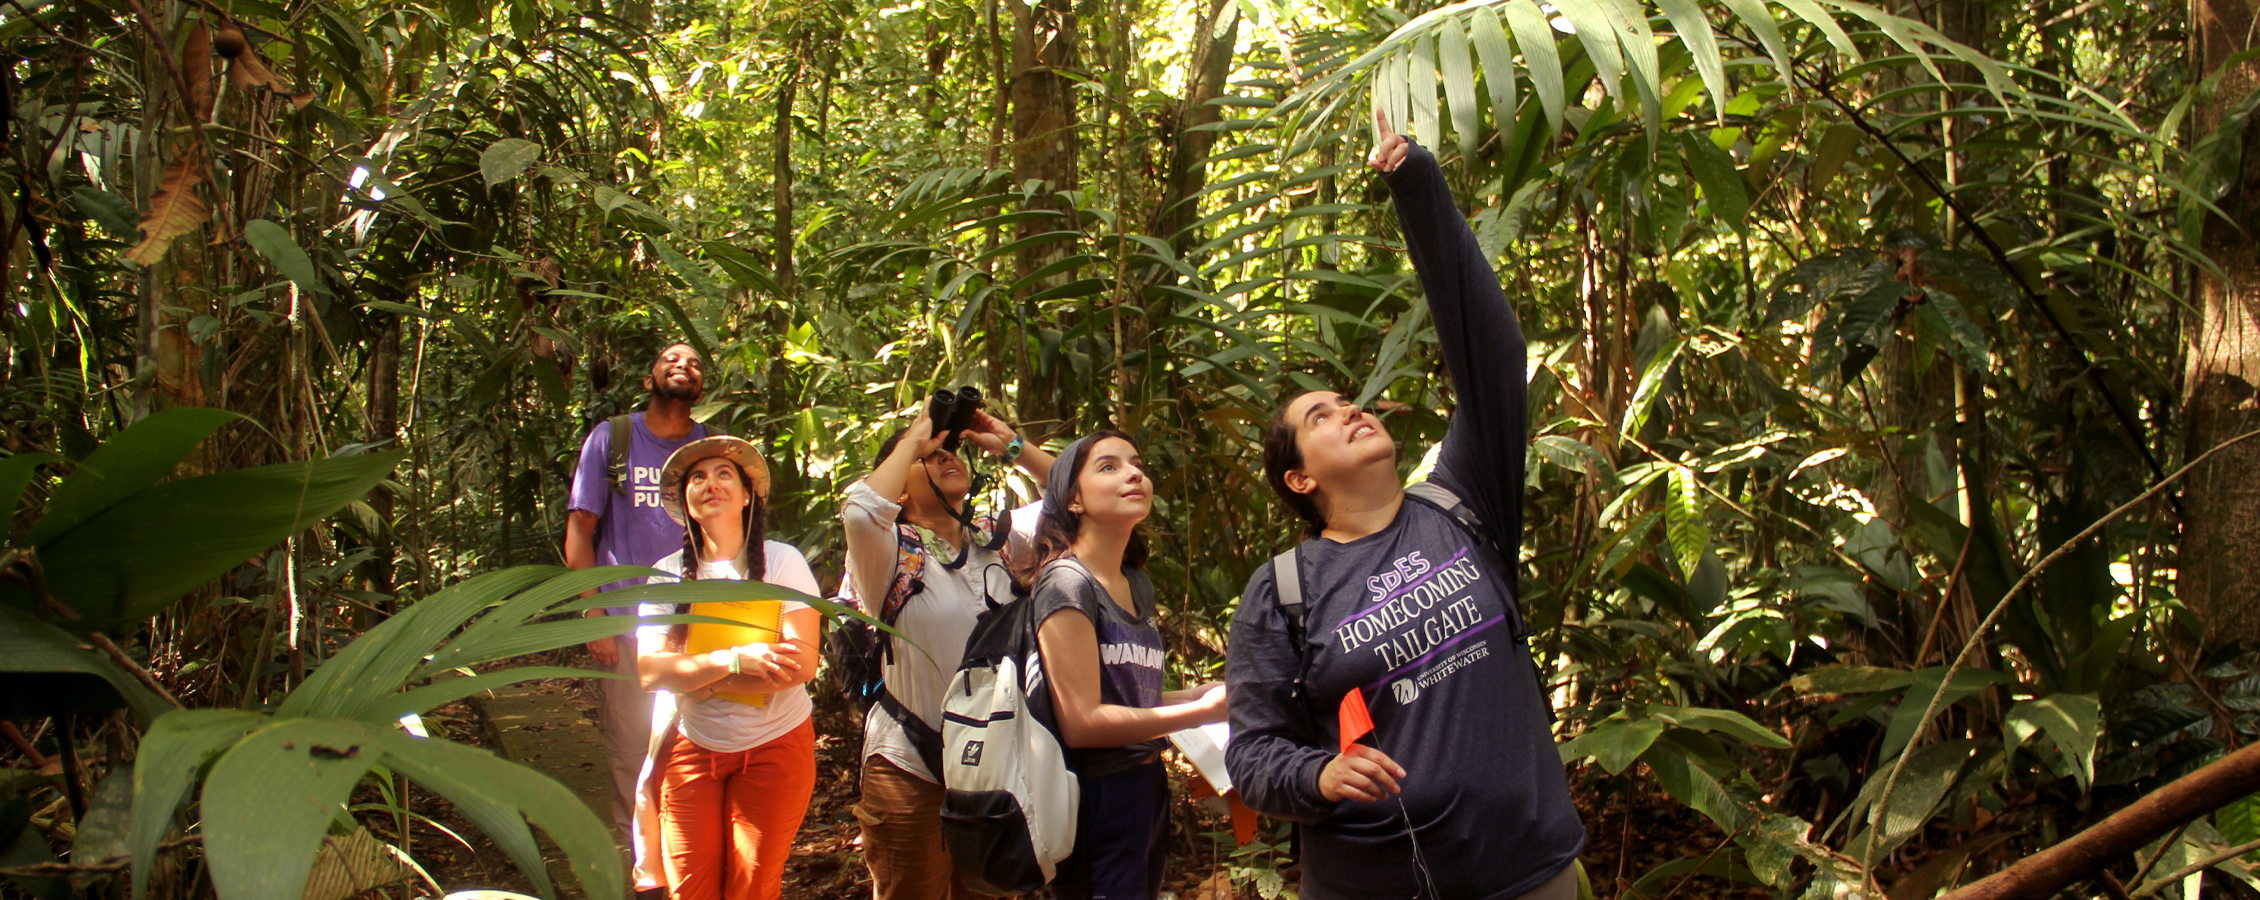 Students and faculty walk through a jungle in Costa Rica.